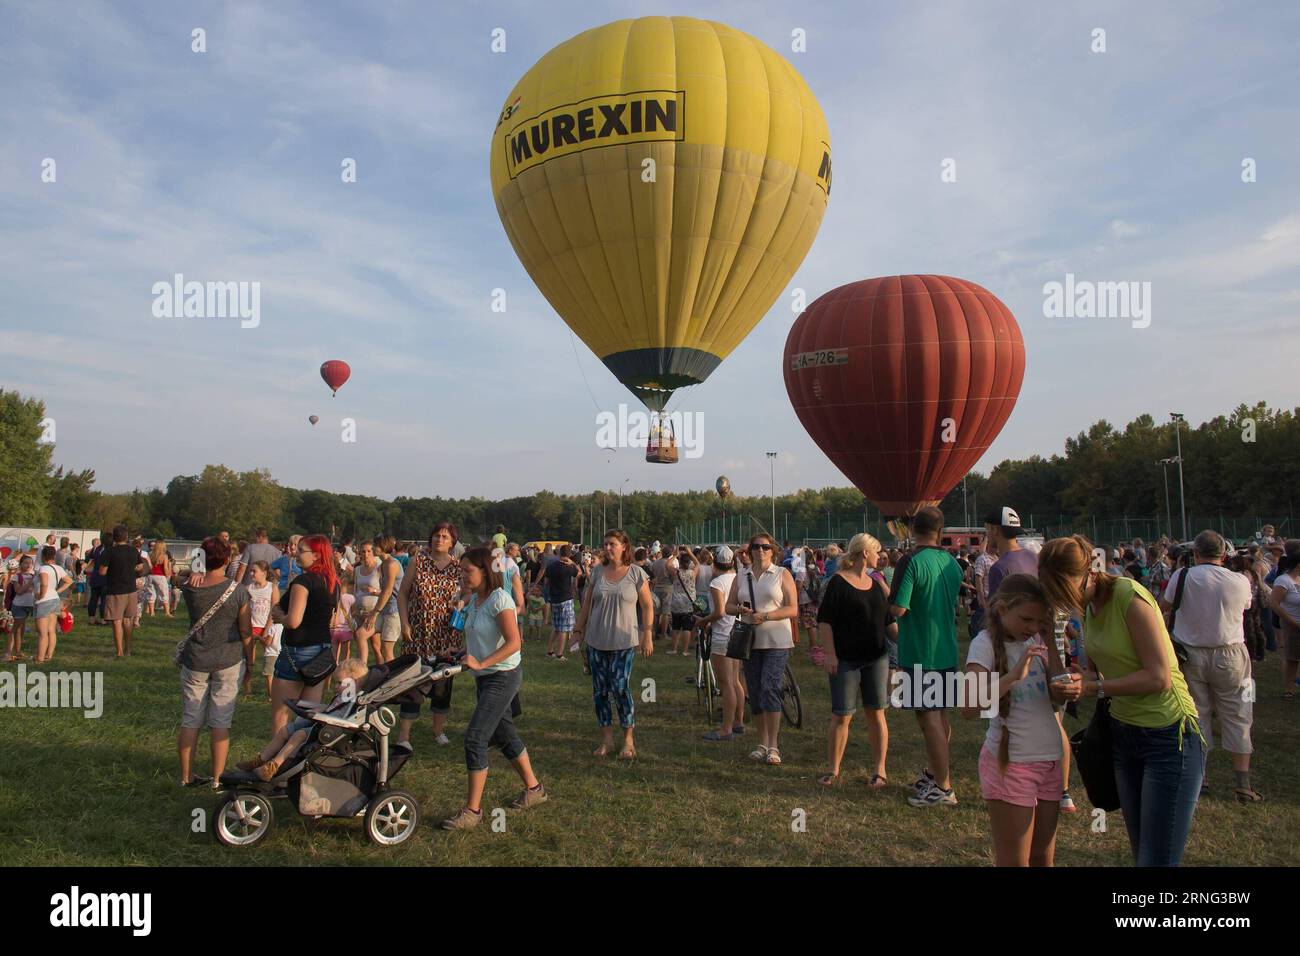 People visit the 22nd Lake Velence International Hot Air Balloon Carnival in Agard, Fejer, Hungary, Sept. 3, 2016. ) (cyc) HUNGARY-AGARD-HOT AIR BALLOON-CARNIVAL AttilaxVolgy PUBLICATIONxNOTxINxCHN   Celebrities Visit The 22nd Lake Velence International Hot Air Balloon Carnival in Agard Fejer Hungary Sept 3 2016 cyc Hungary Agard Hot Air Balloon Carnival AttilaxVolgy PUBLICATIONxNOTxINxCHN Stock Photo